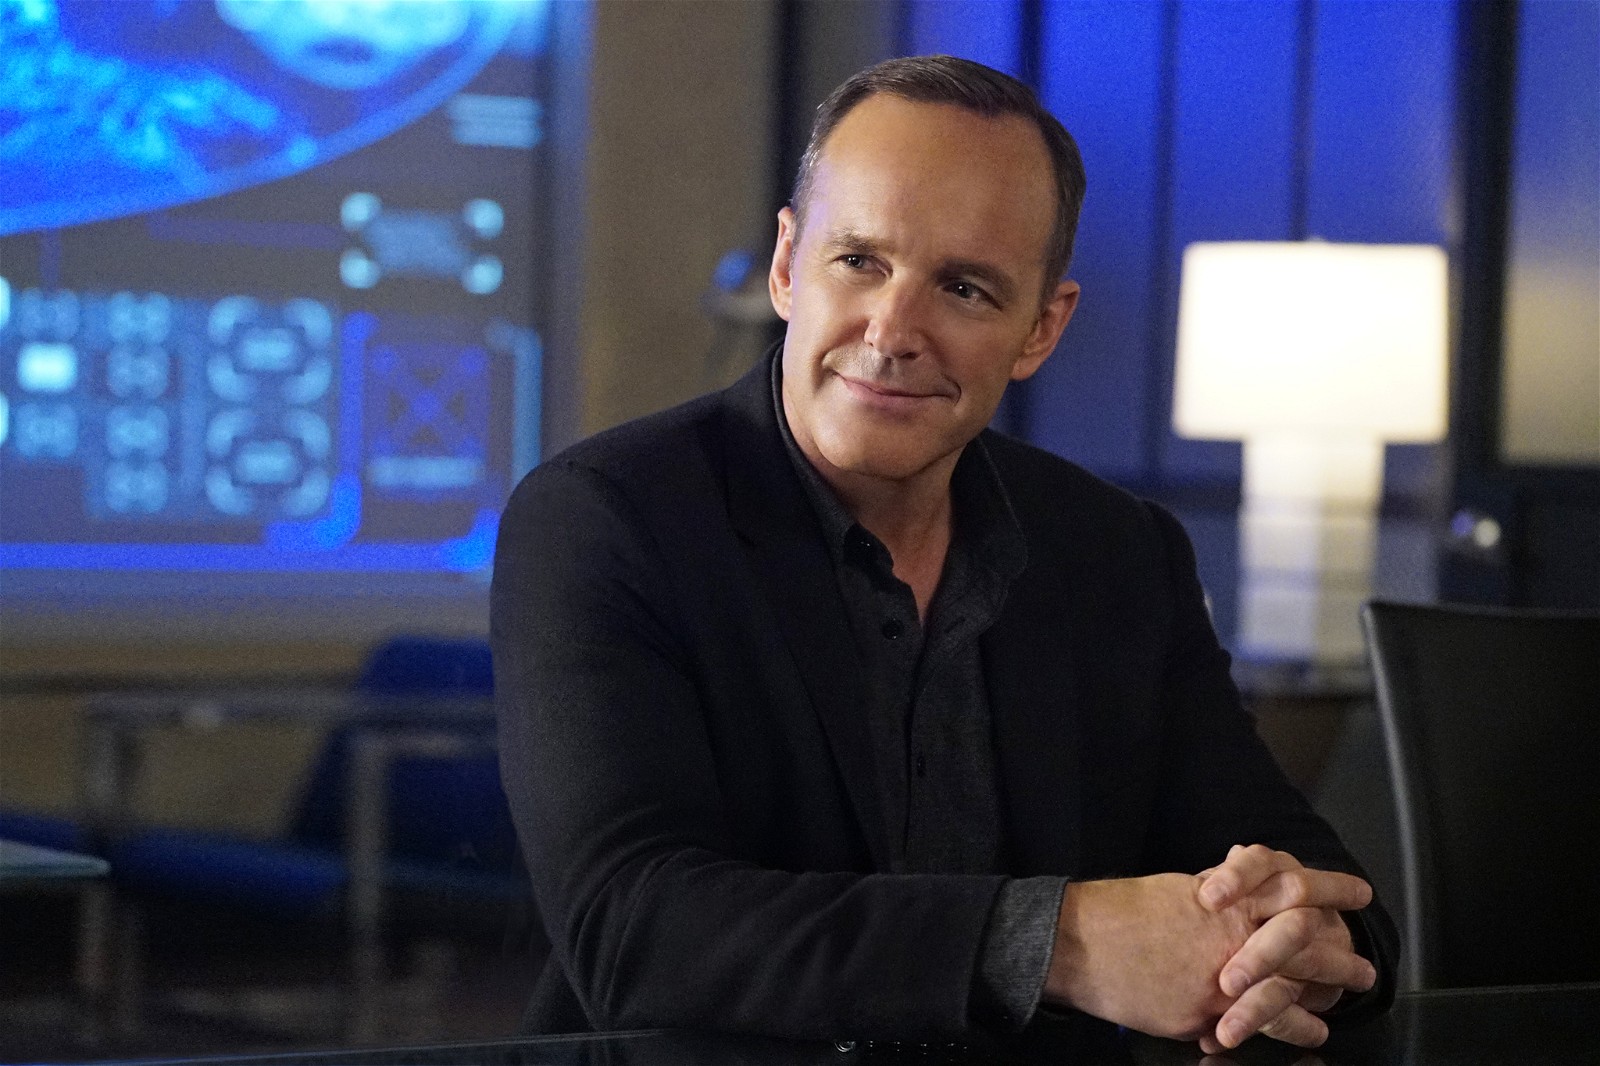 Clark Gregg talks about his character retuning in the multiverse